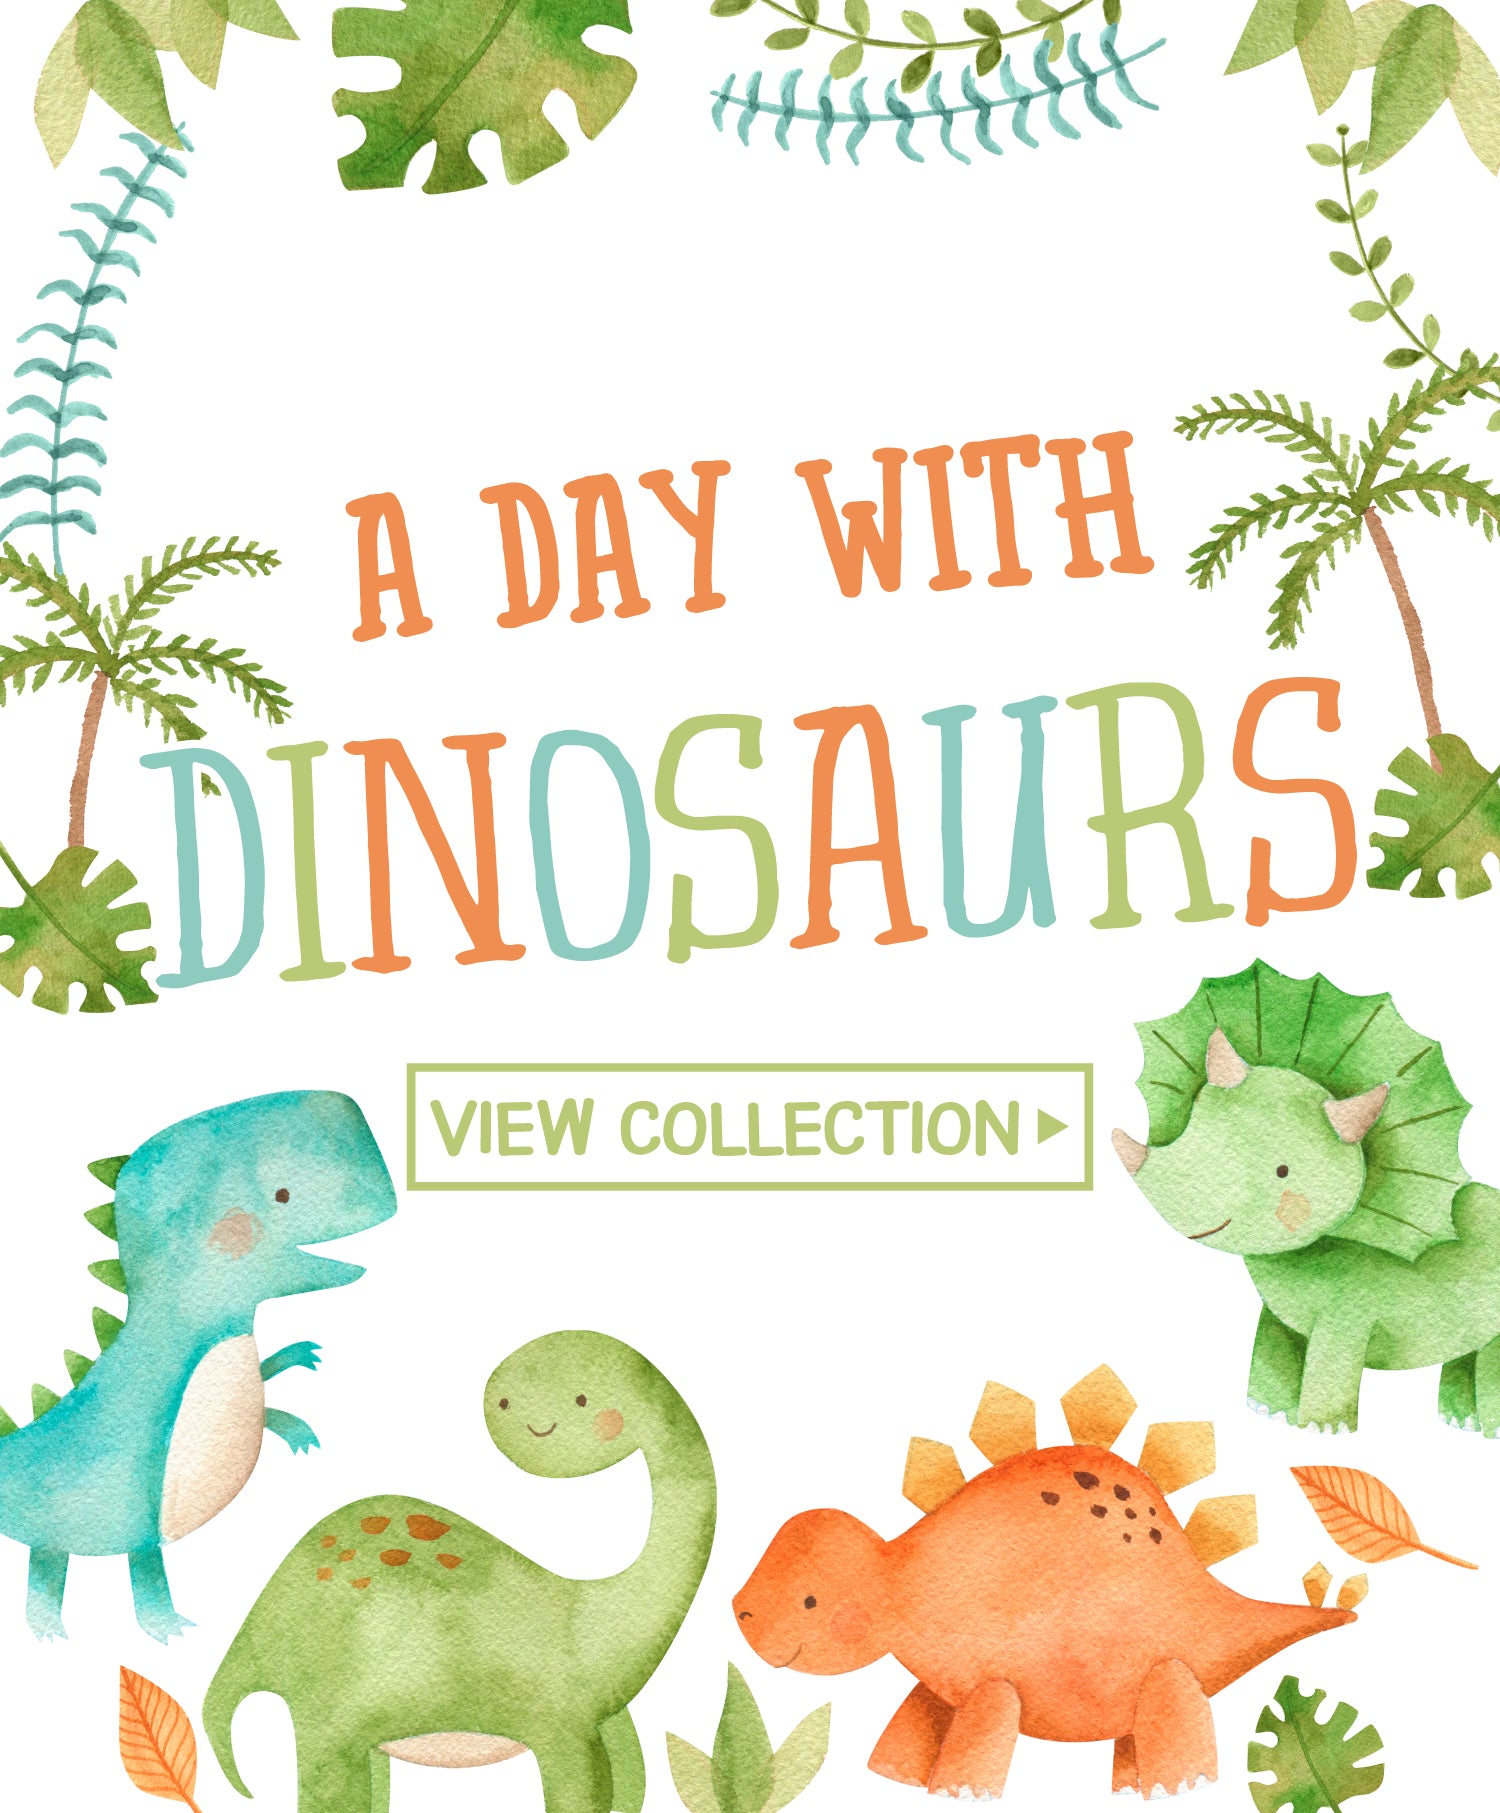 A Day With Dinosaurs